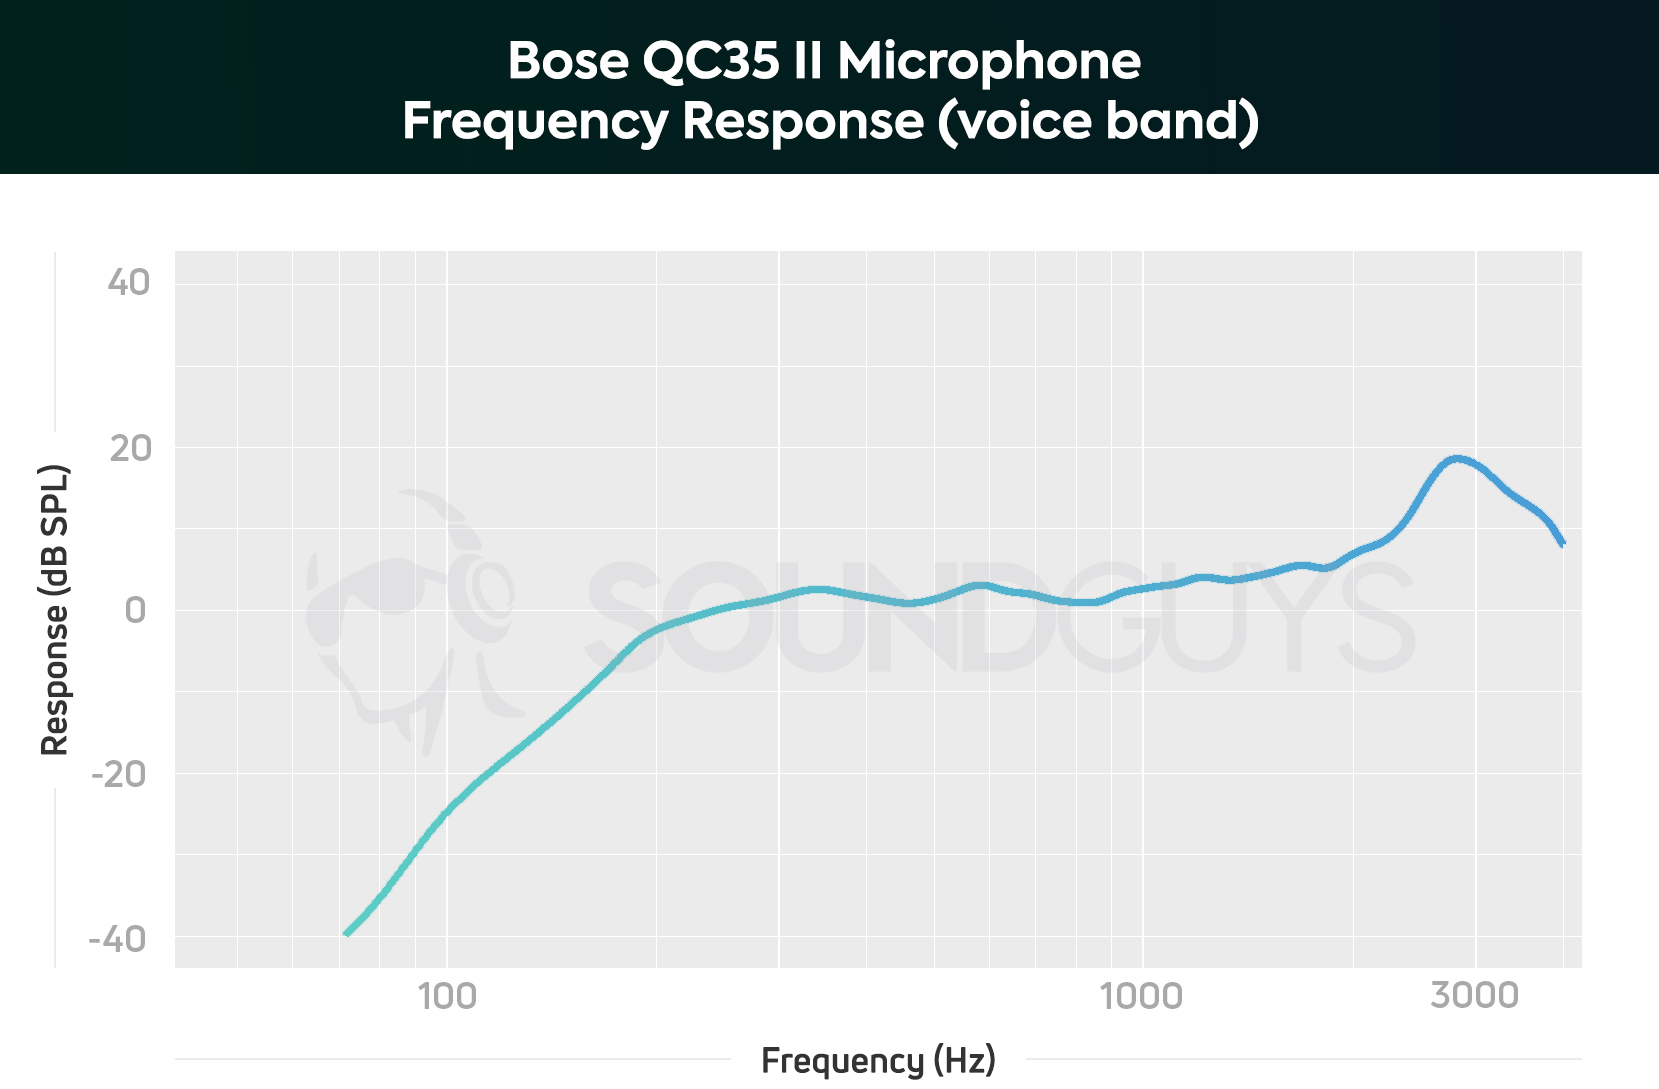 A chart showing the microphone performance of the Bose QC35 II in the voice band.